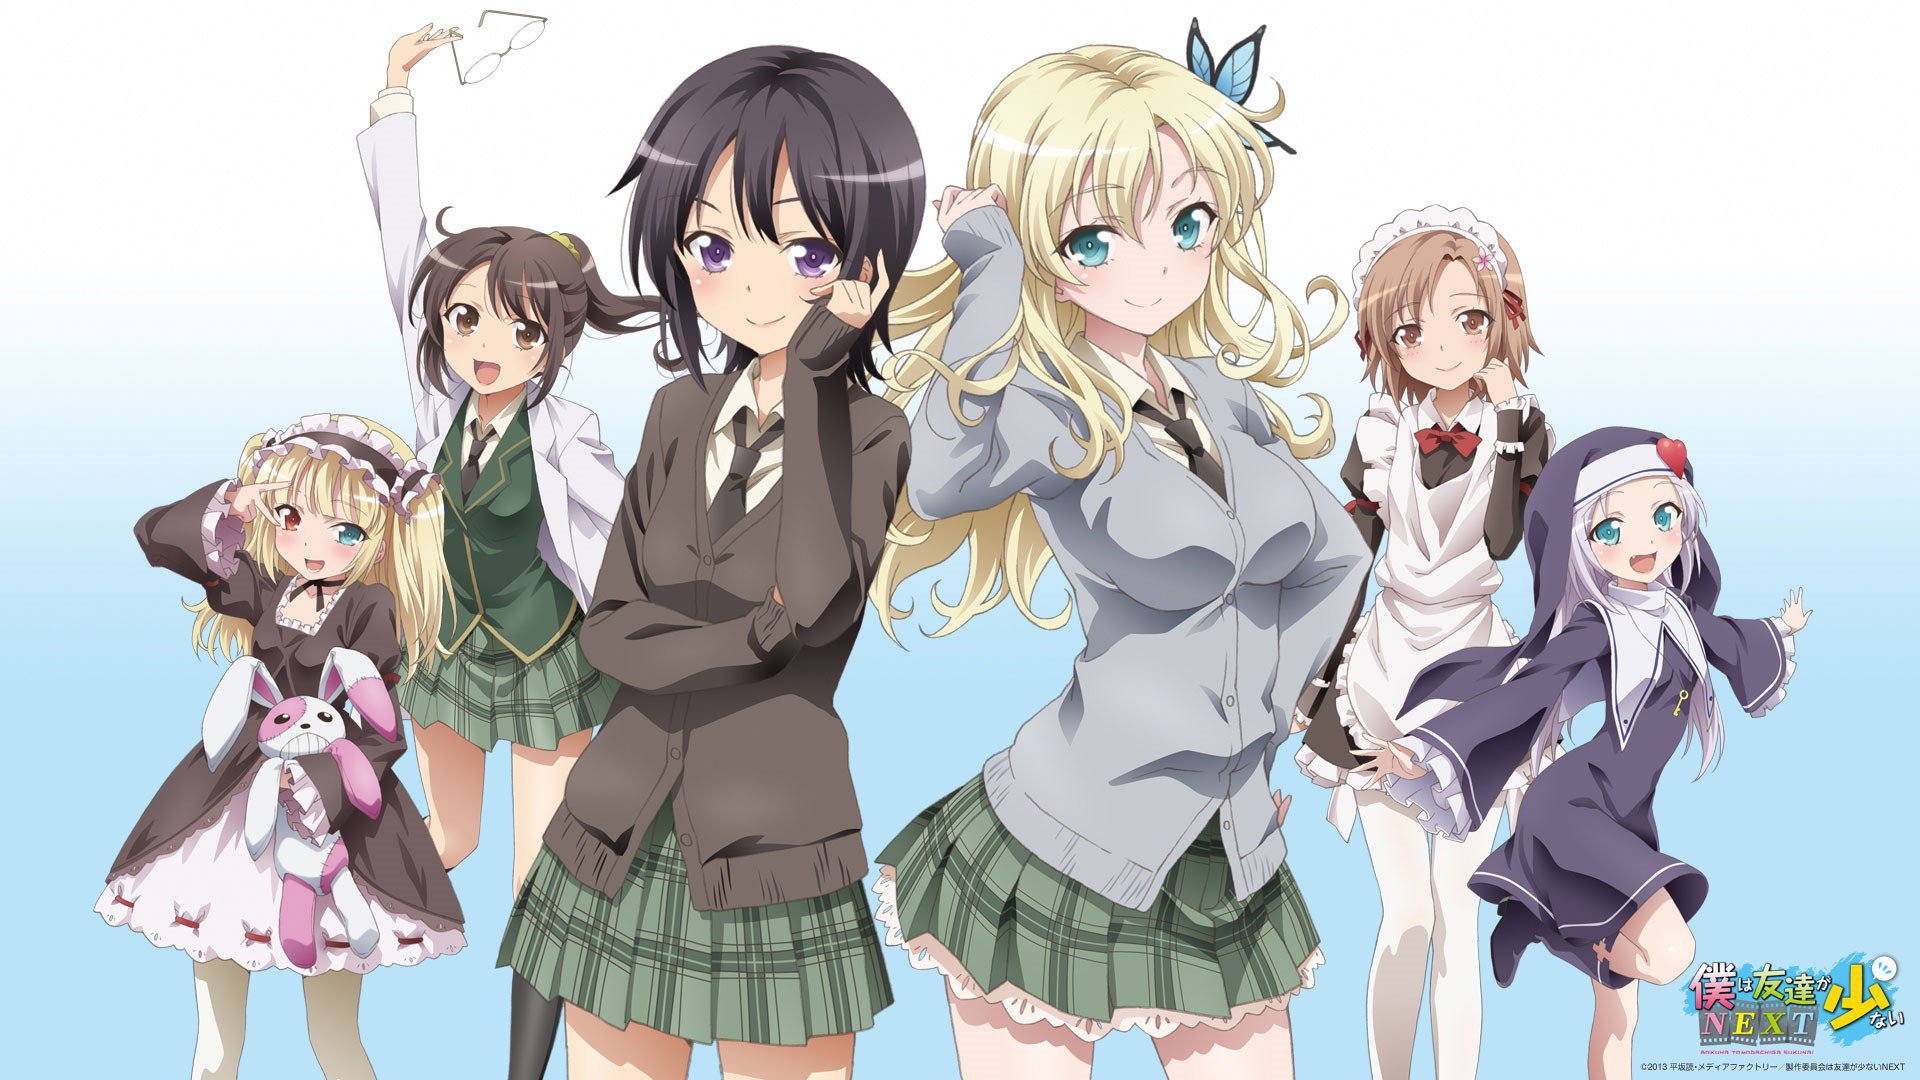 Top 20 Anime School Clubs People Want to Join St. Chronica’s Academy Neighbors Club